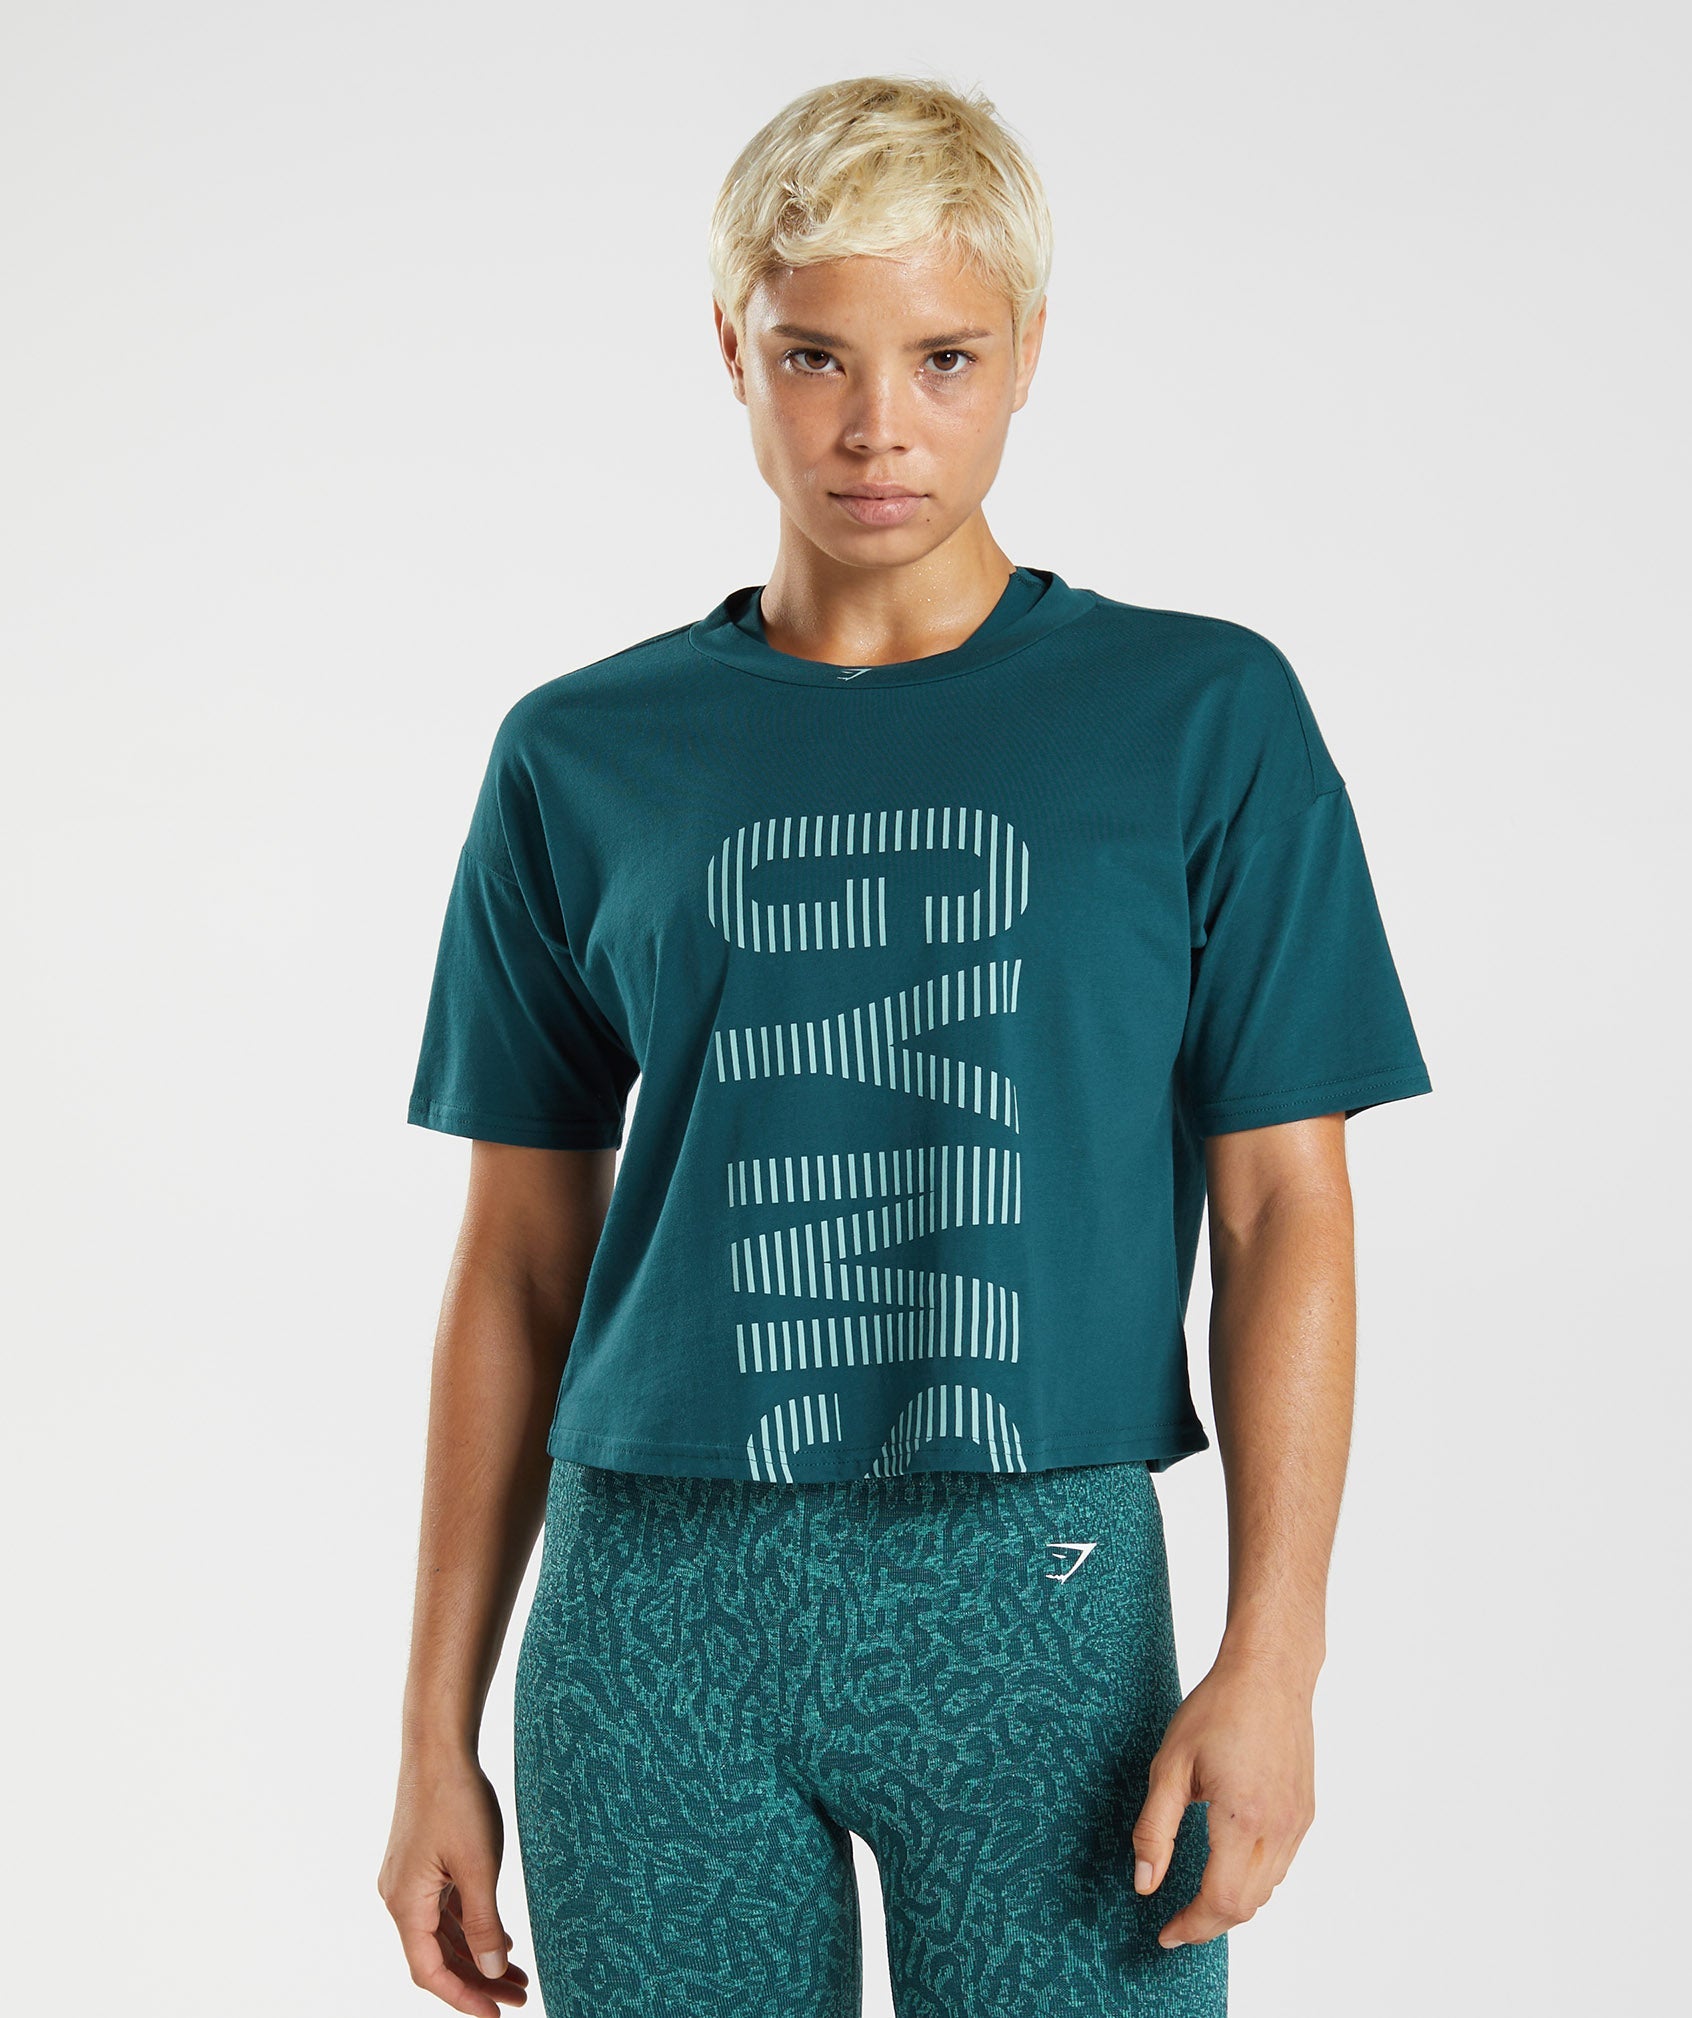 315 Midi T-Shirt in Winter Teal/Pearl Blue - view 1